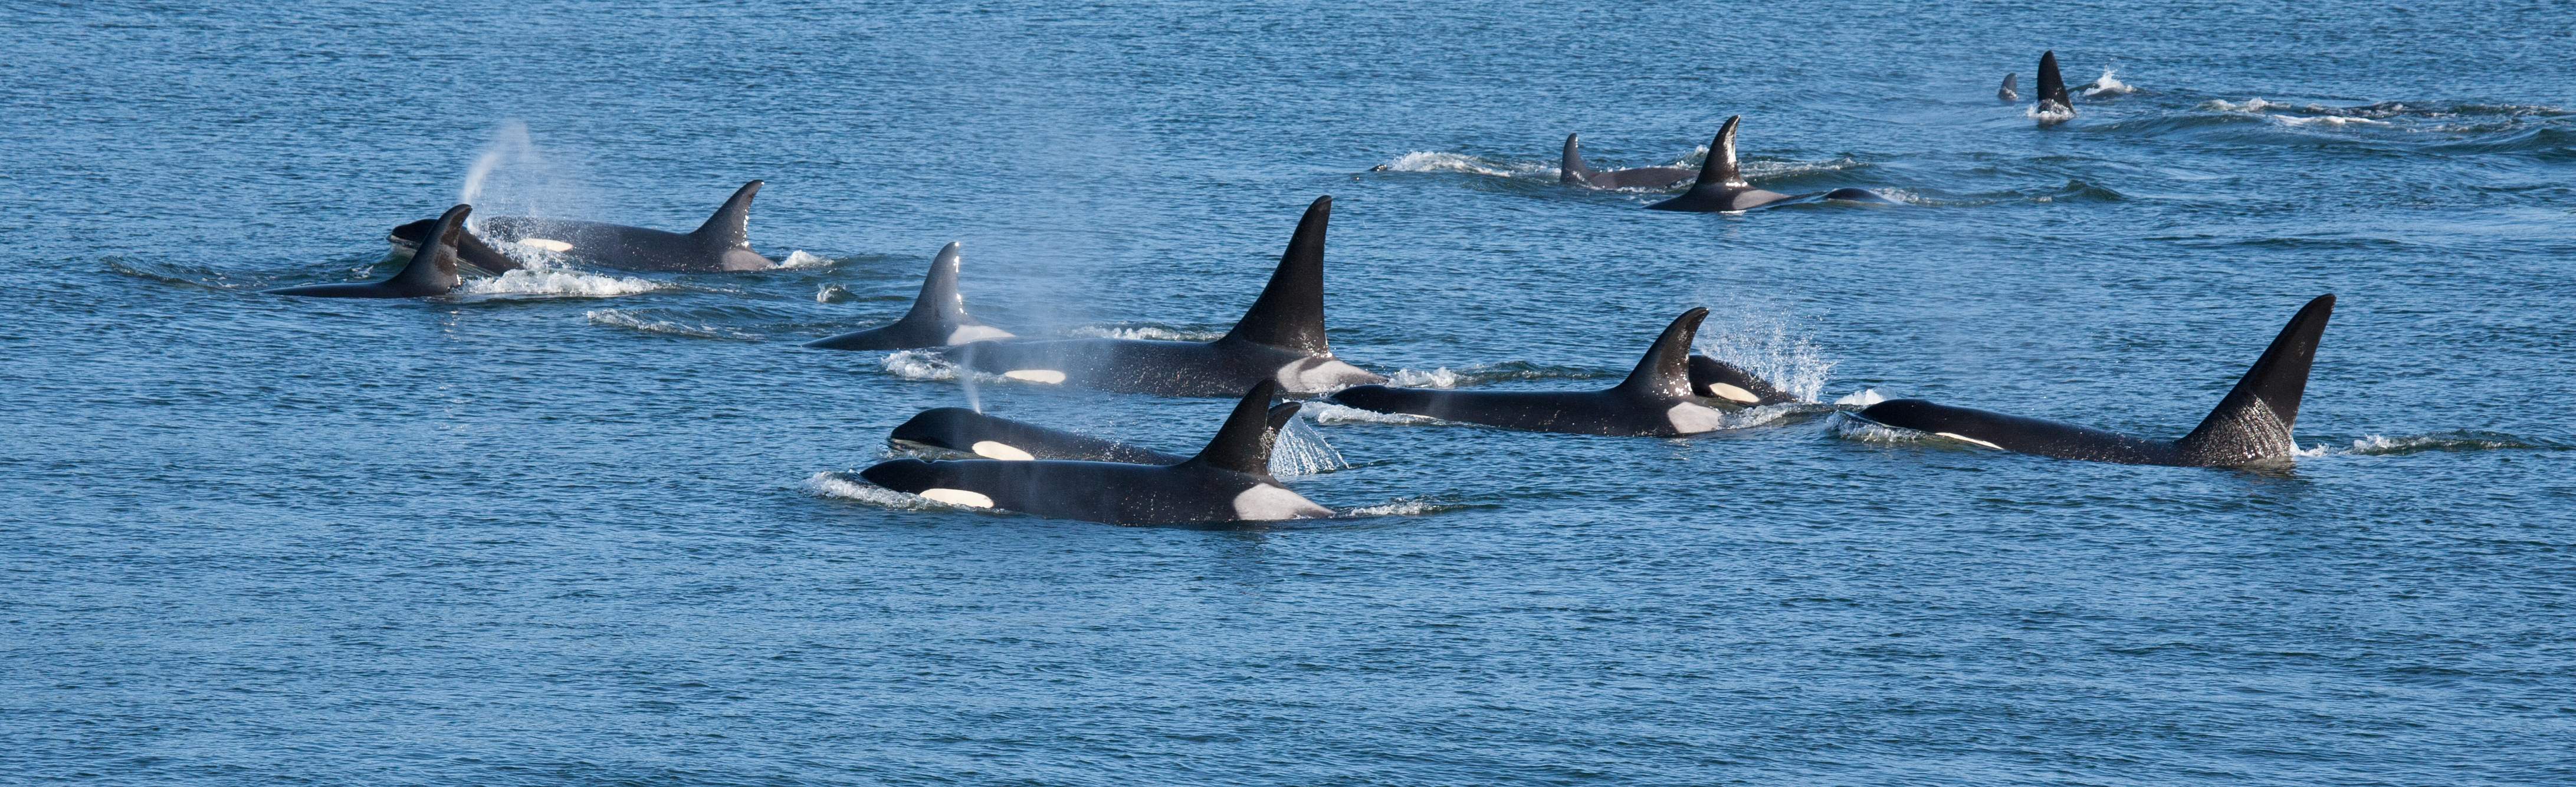 Send a message to protect orcas